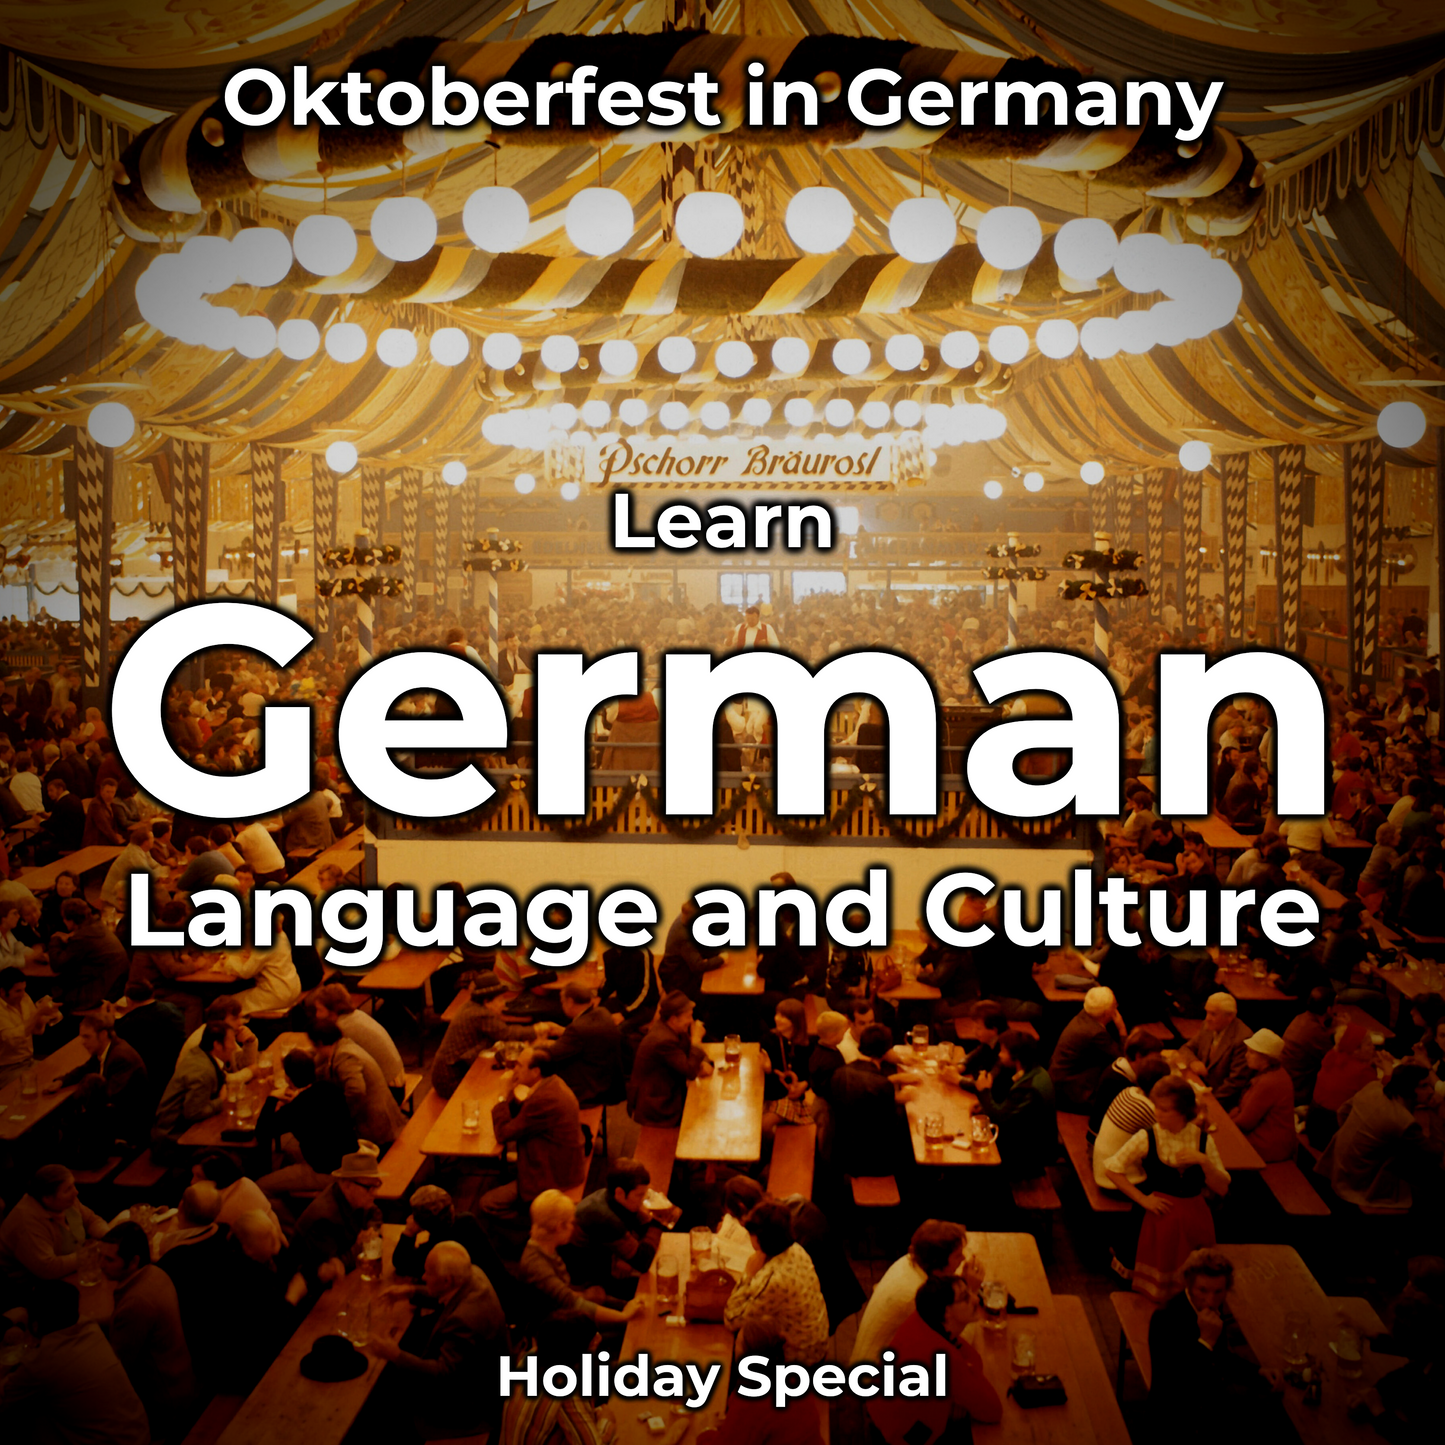 Learn German Language and Culture: Oktoberfest in Germany